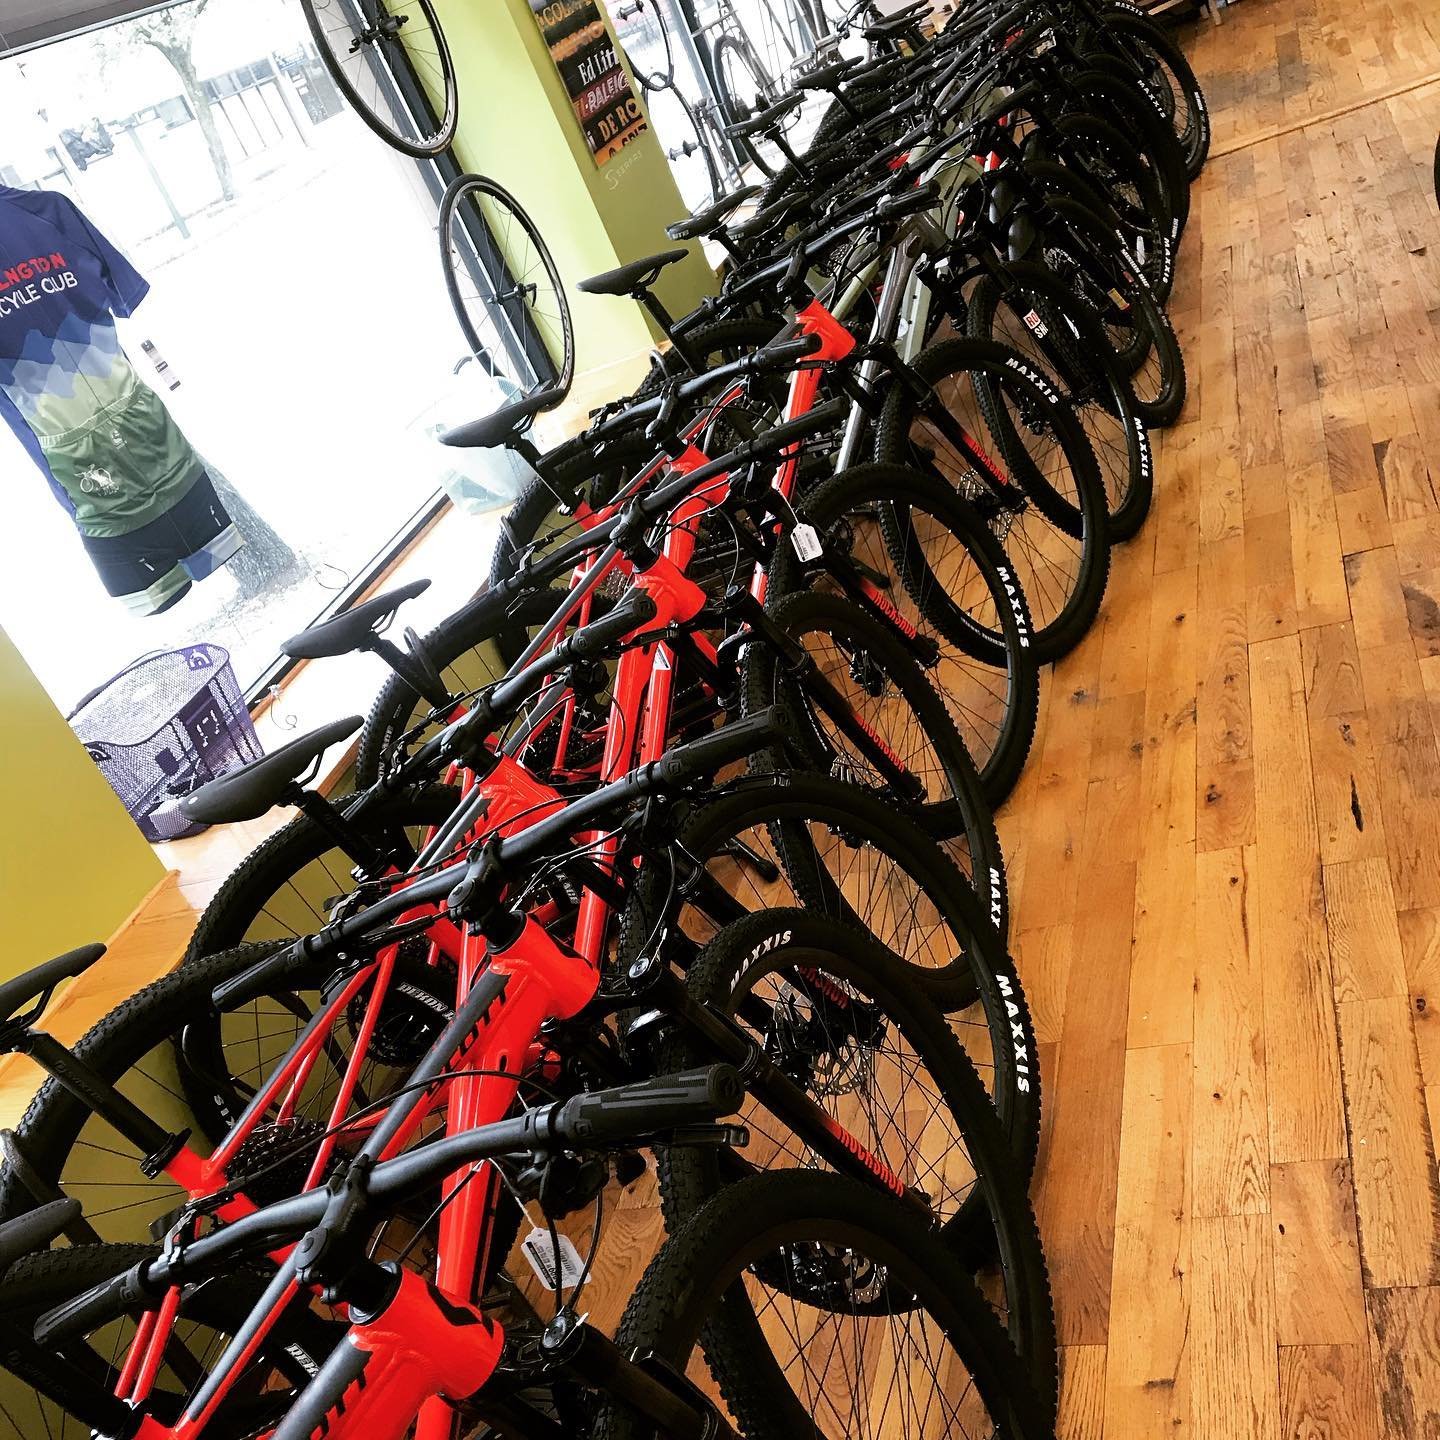 We are consistently getting new bikes in these days. We have an awesome selection of mountain, road, city, kids and used bikes. We are open for walk ins, just wear your mask and keep your 6 feet. We are excited to find you your two wheeled freedom fr